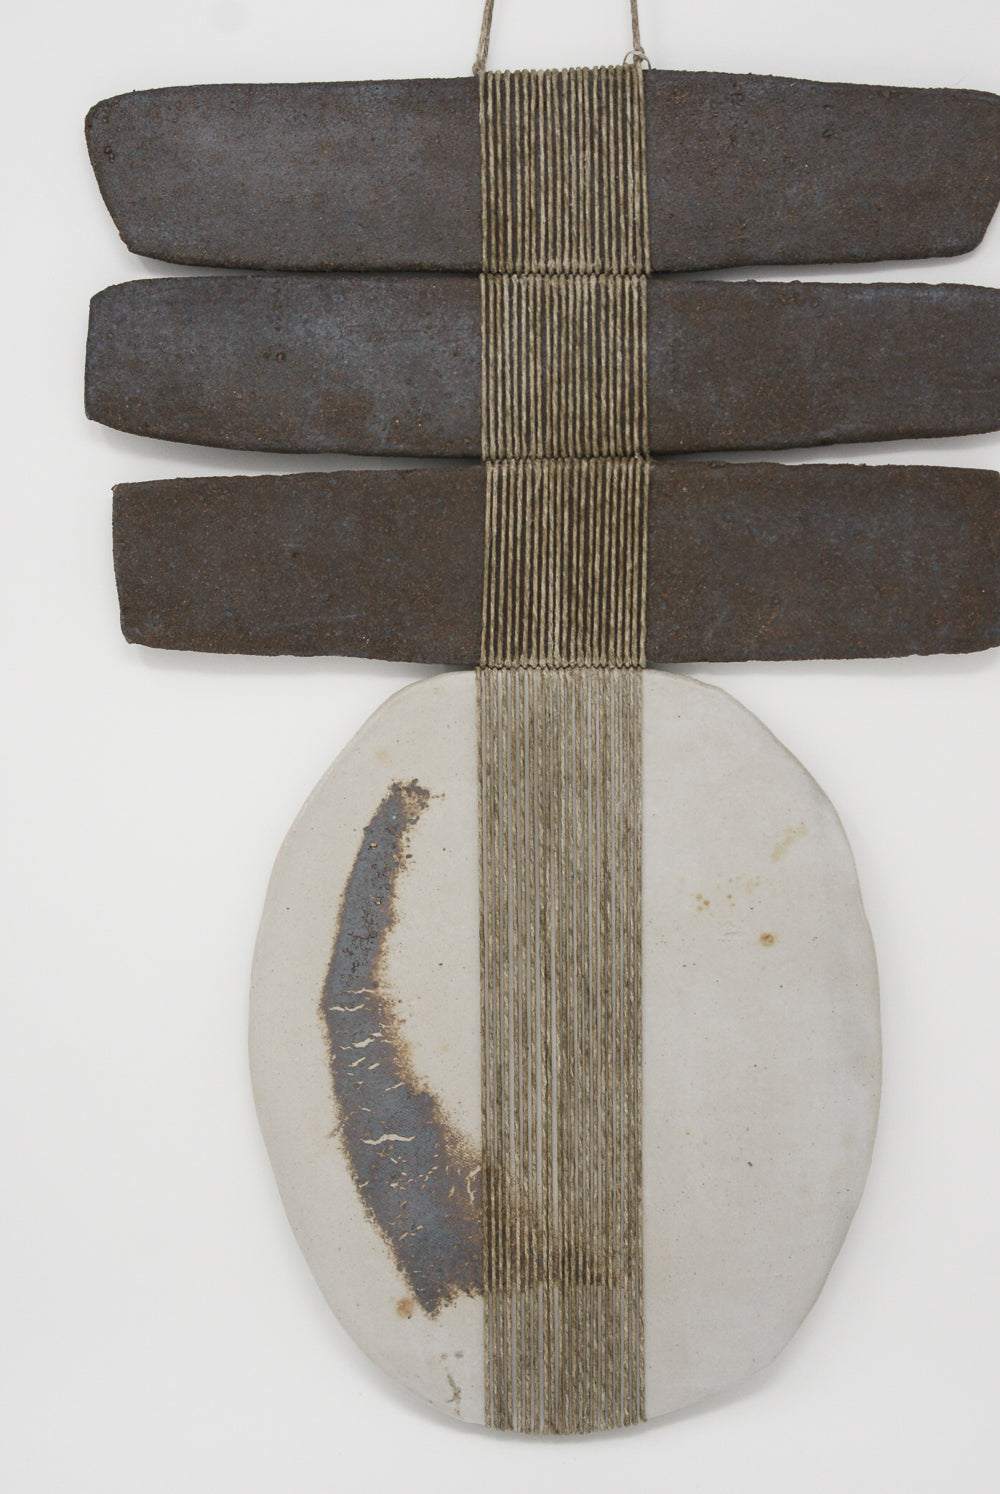 Amy Dov - Ceramic and Linen 4-Piece Wall Hanging with Large Circle - 15” x 10 1/4” detail view